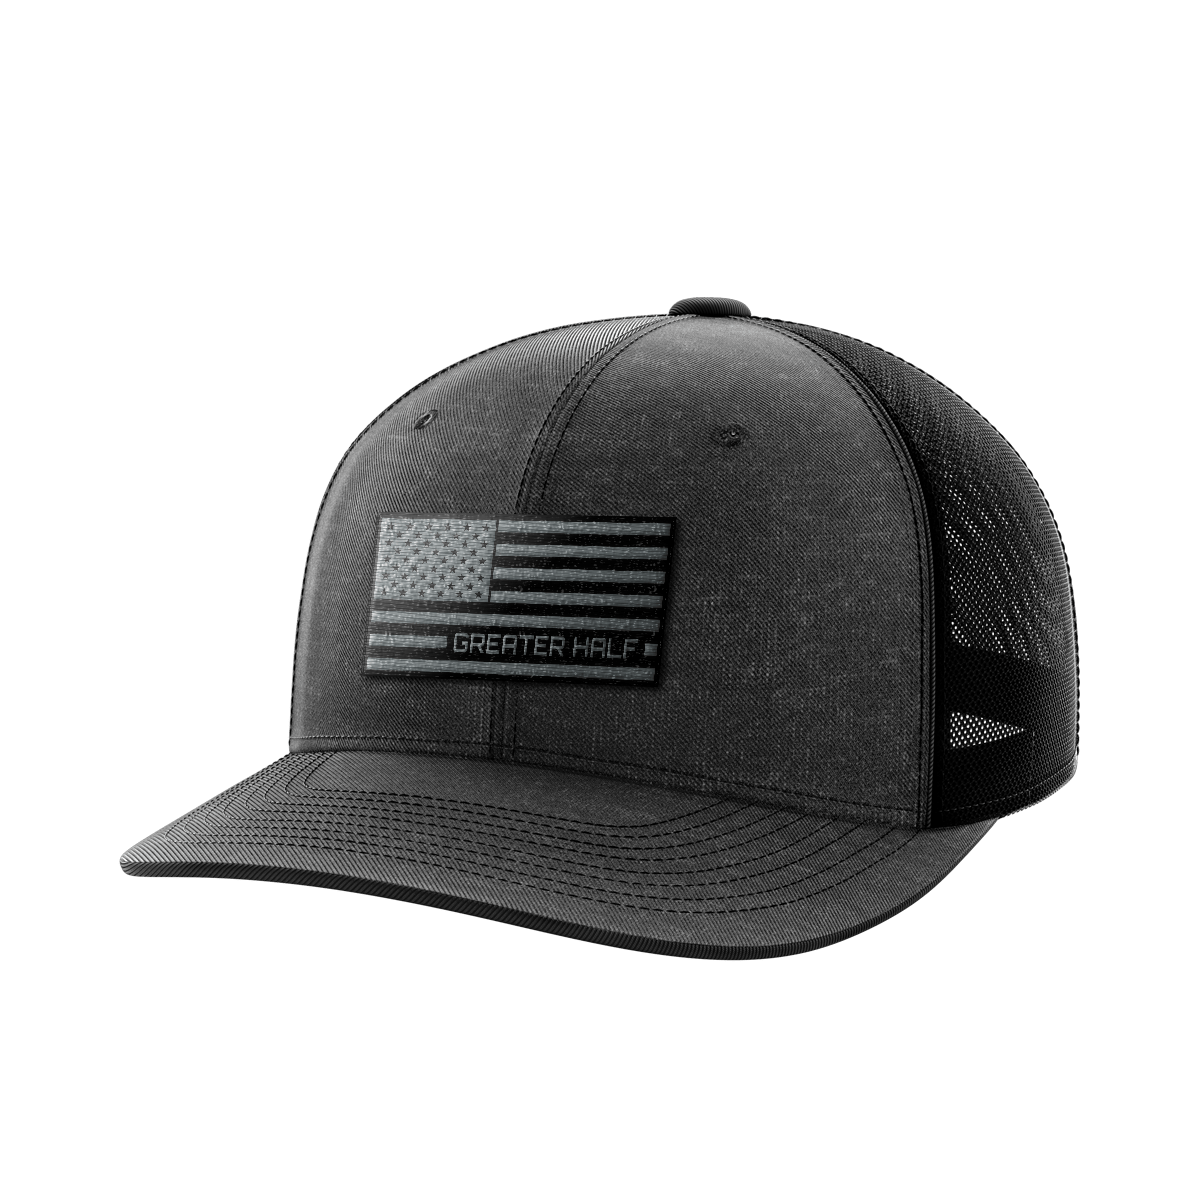 USA Black Flag Woven Patch Hat - Greater Half